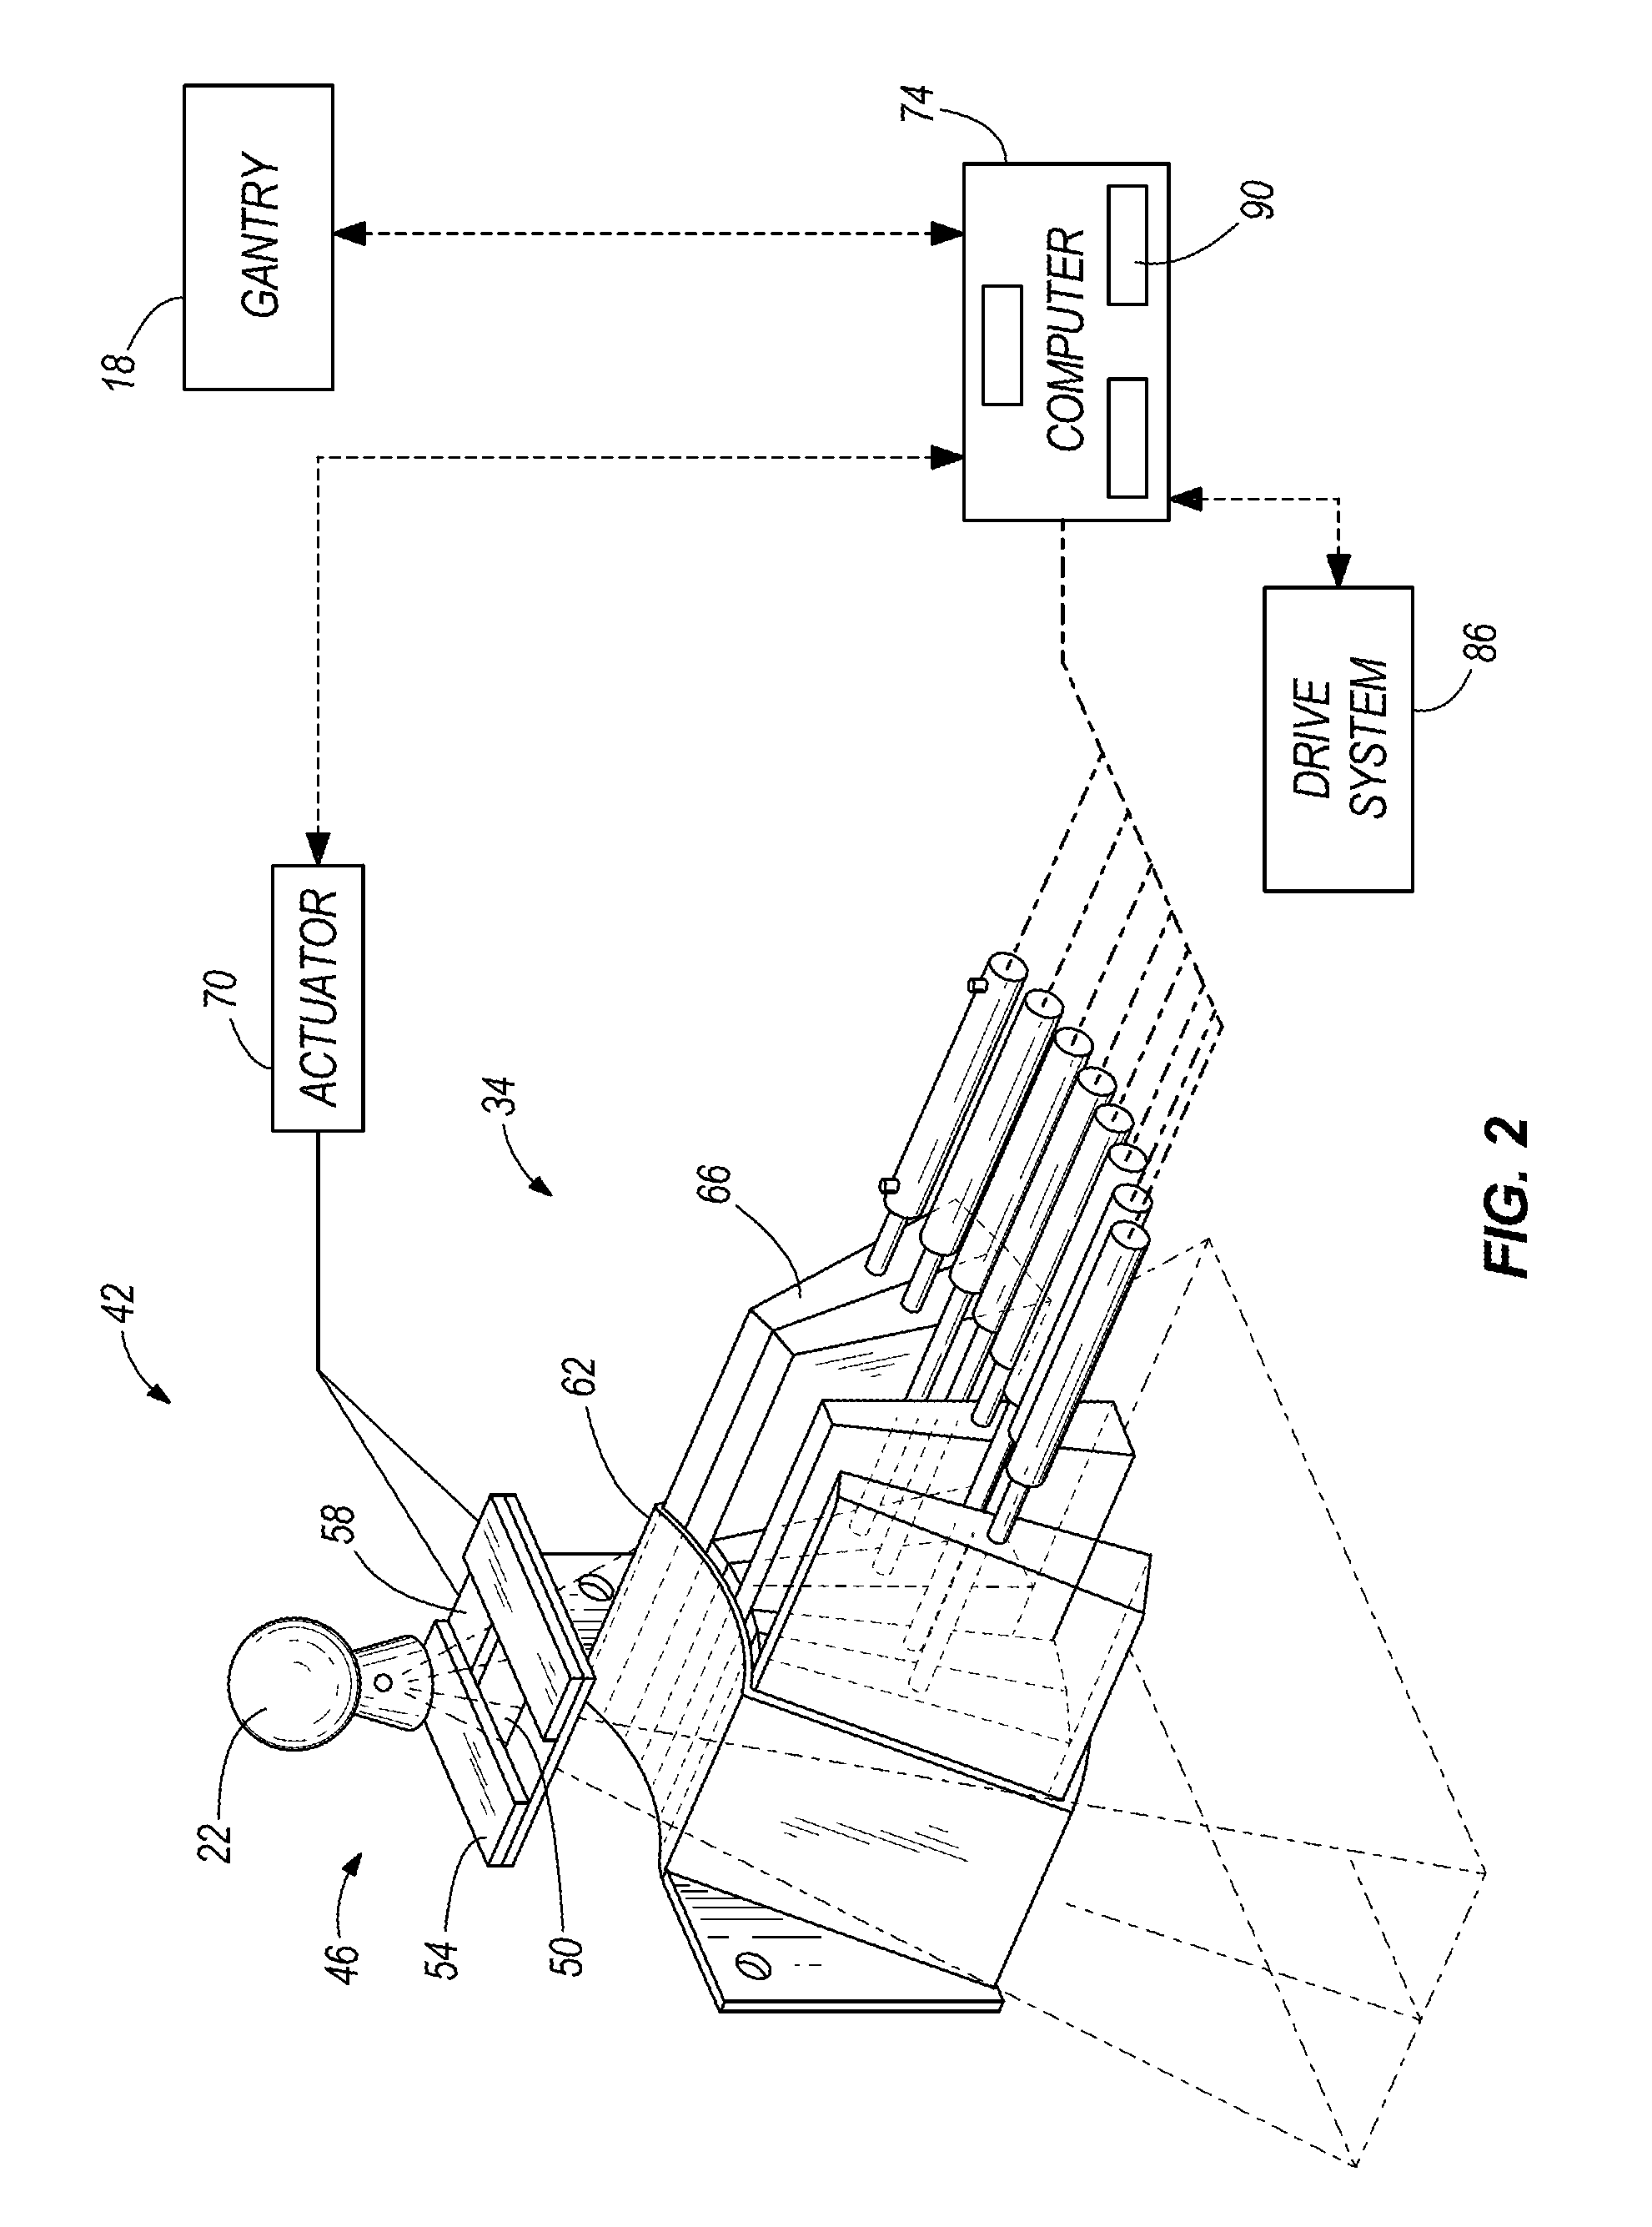 Method and system for evaluating quality assurance criteria in delivery of a treatment plan